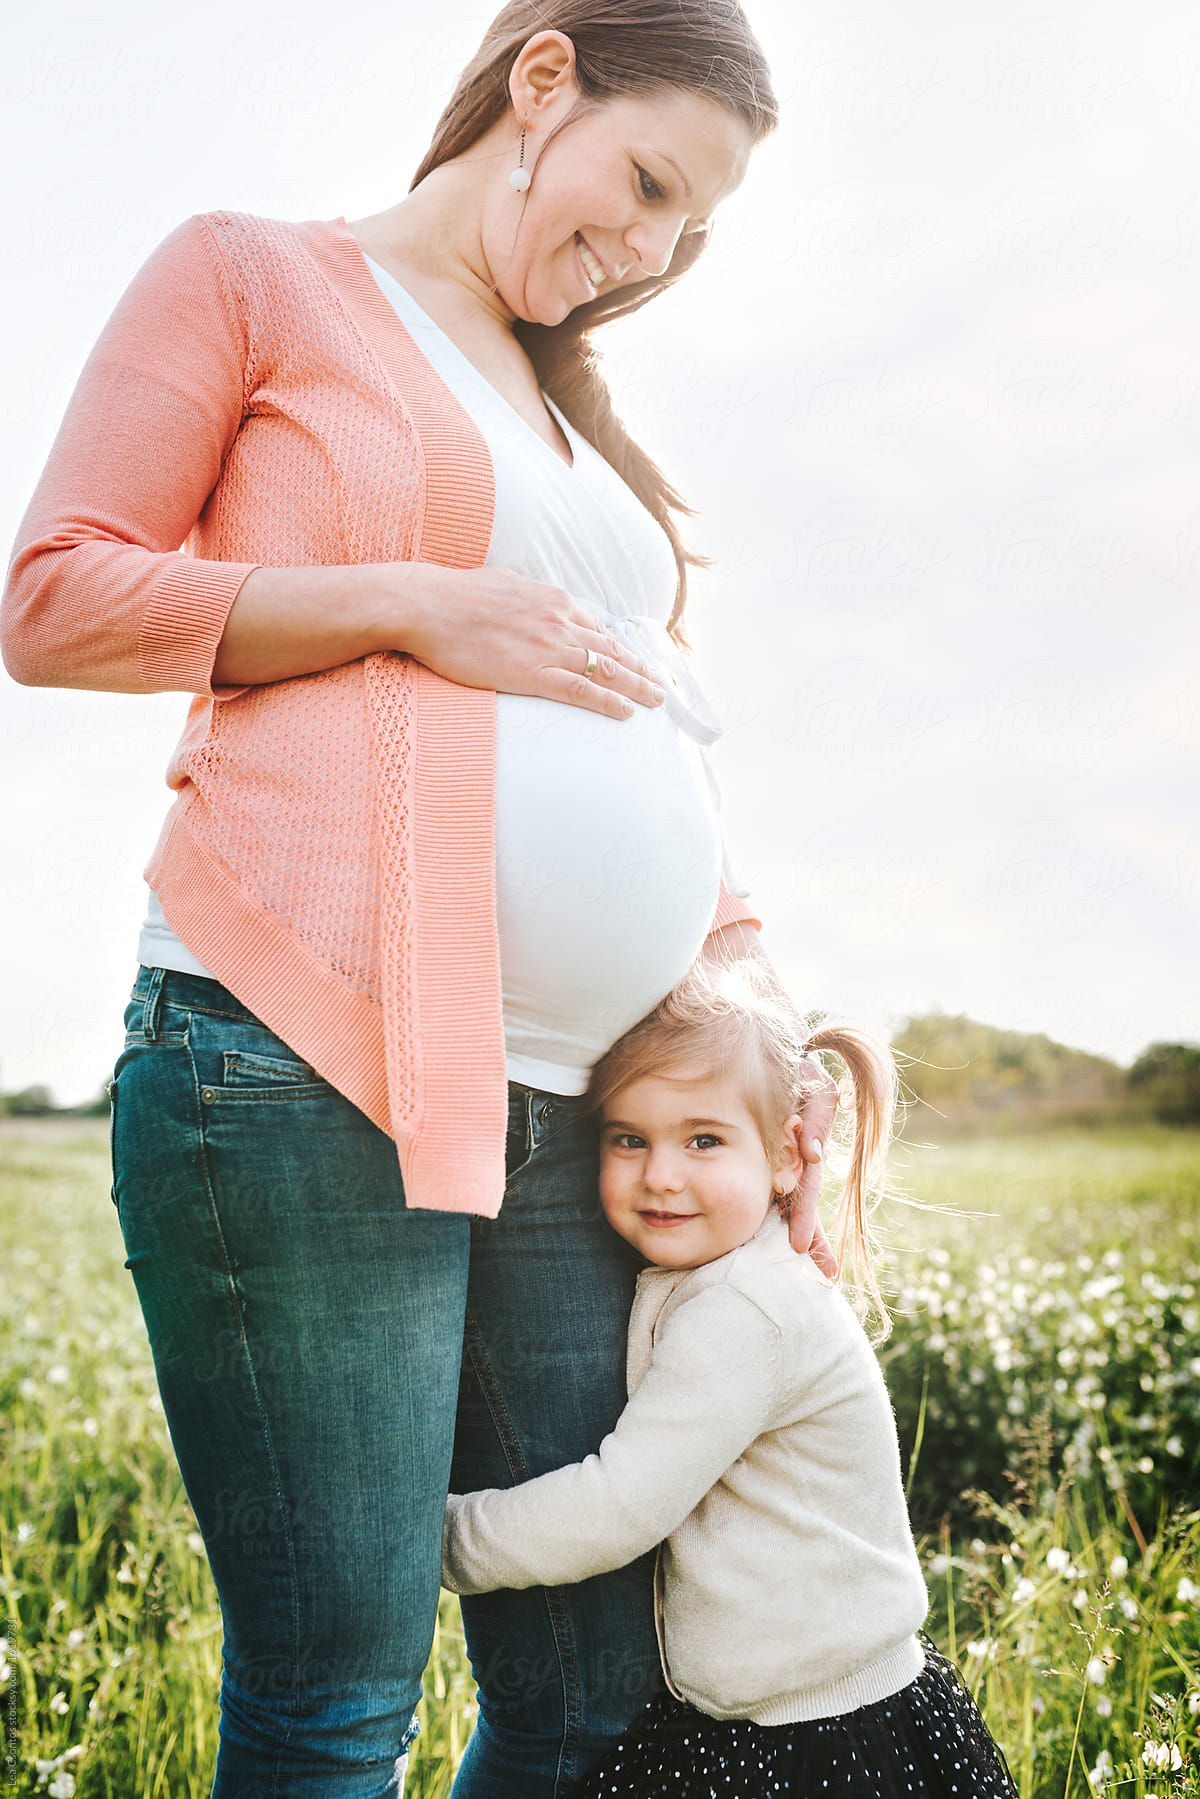 Daughter Hugging Her Pregnant Mother By Stocksy Contributor Lea Csontos Stocksy